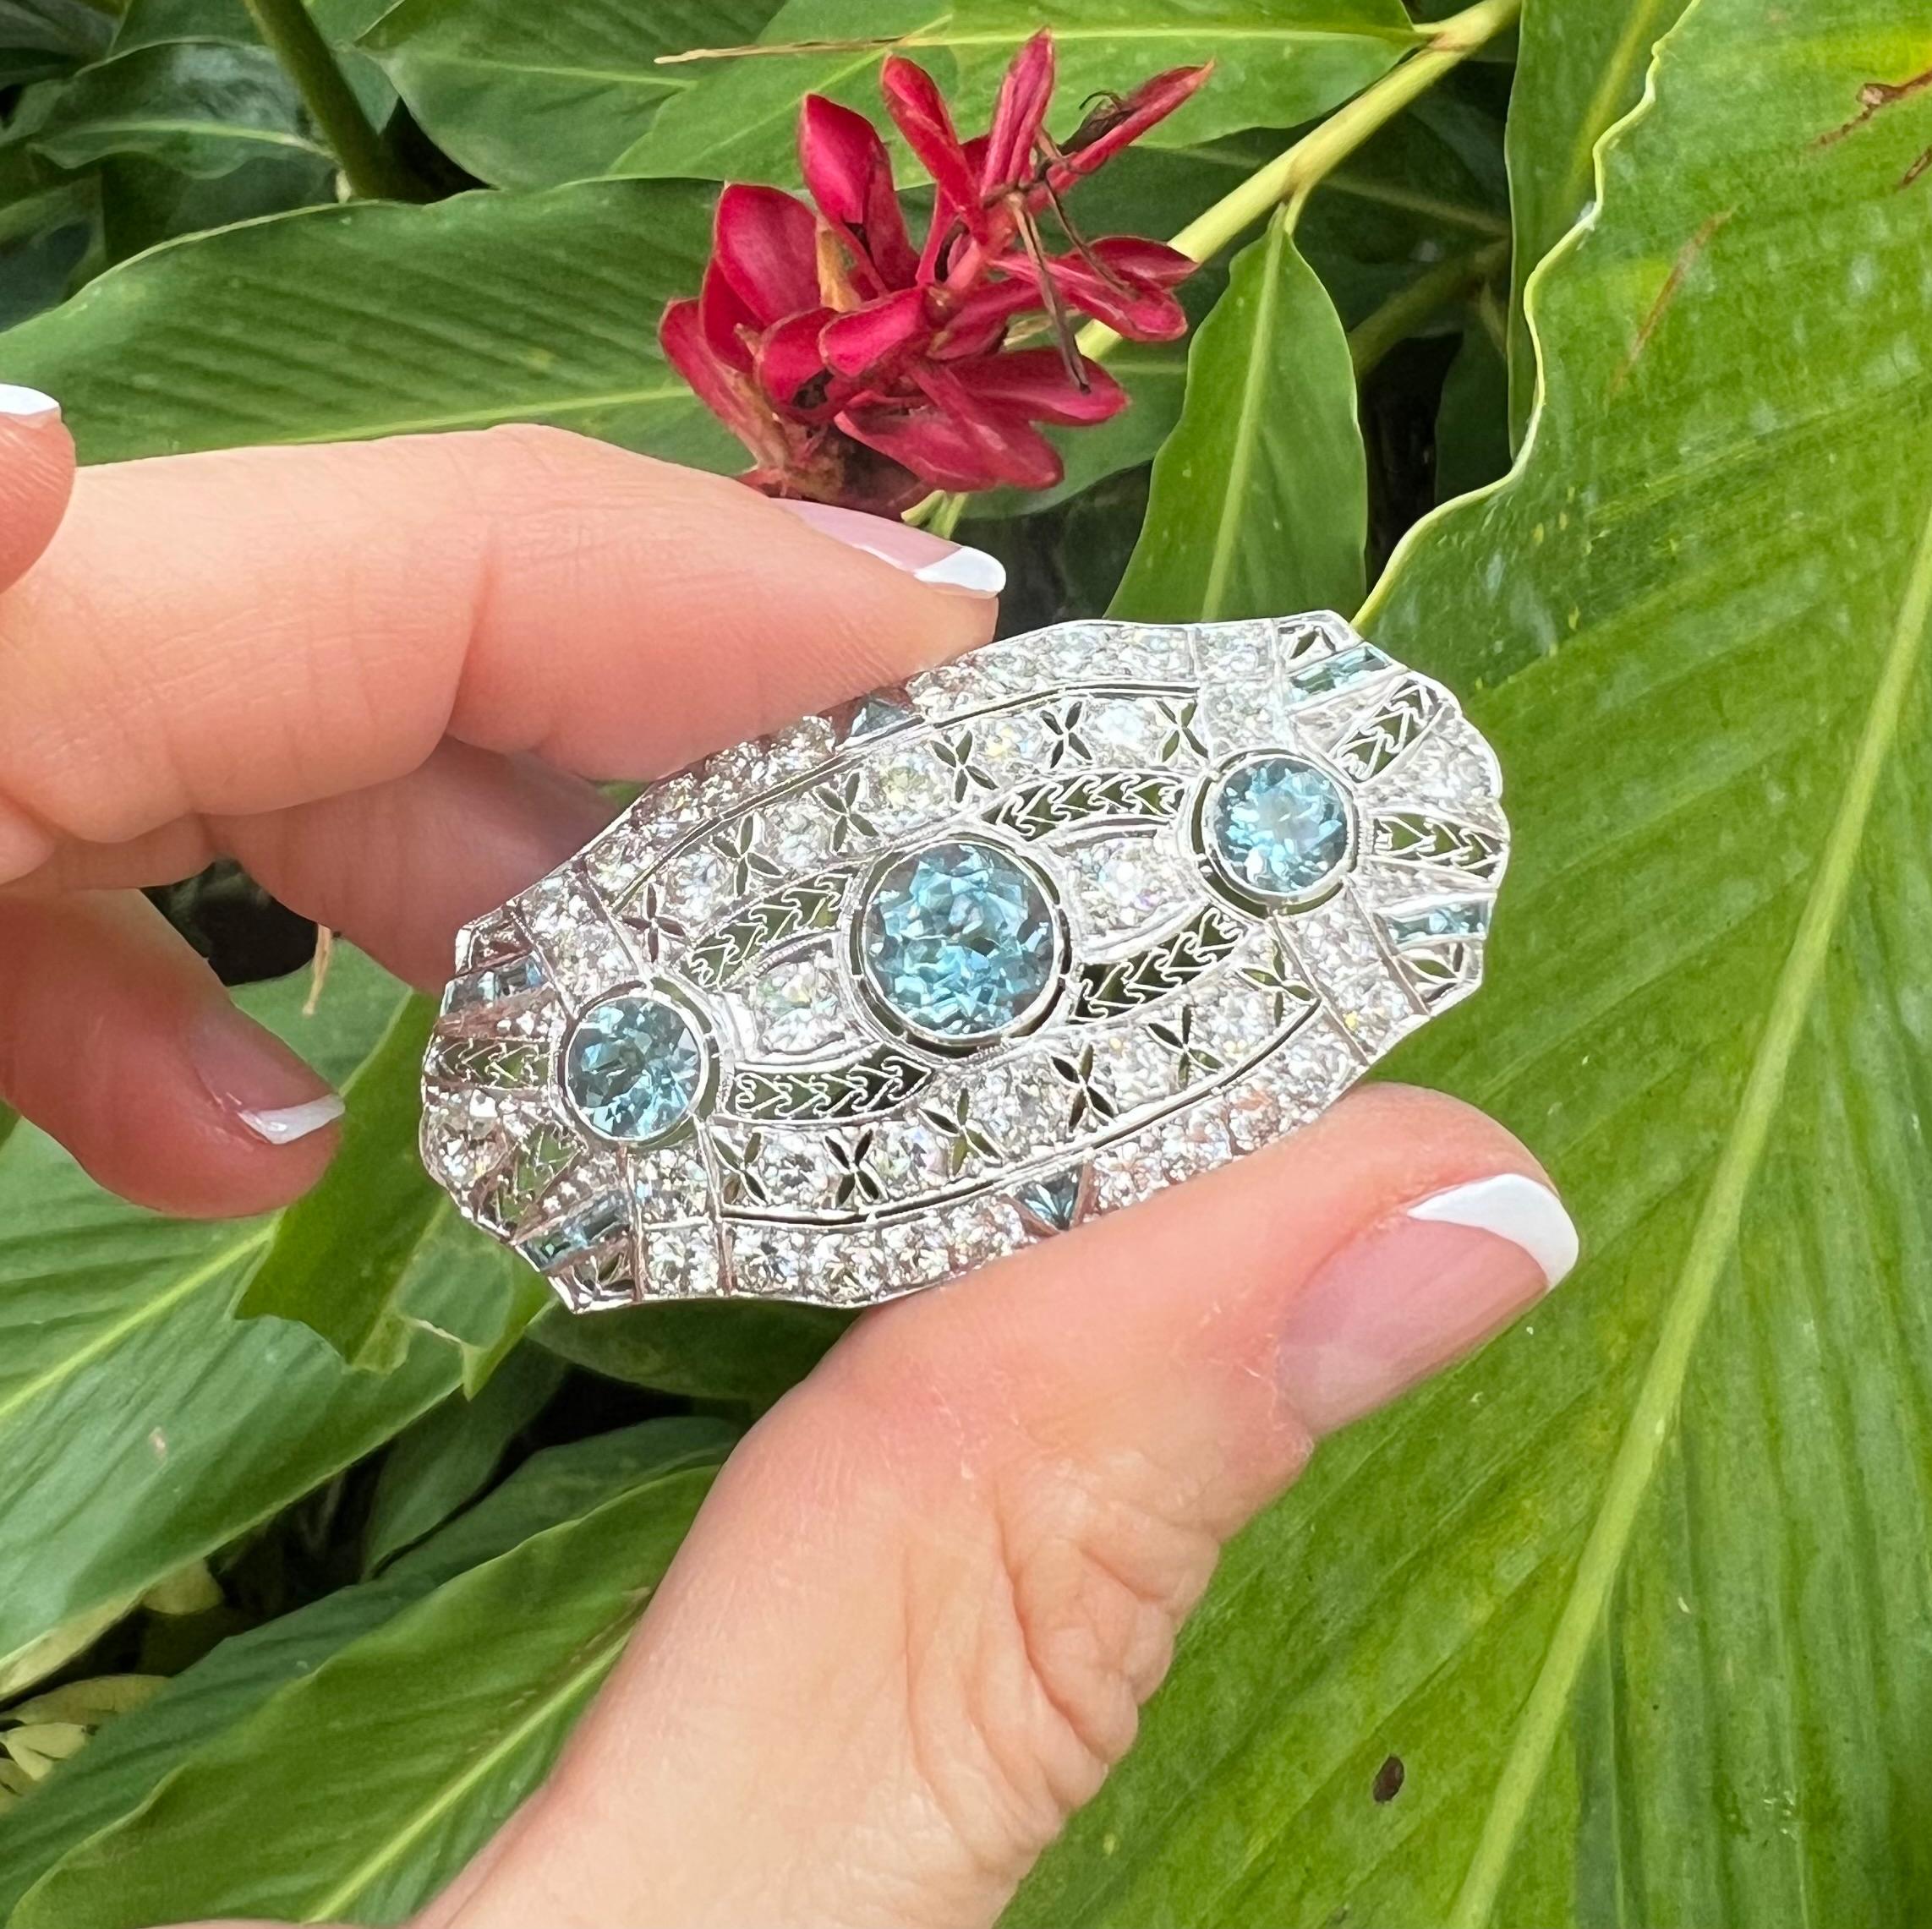 Aquamarine, diamond and platinum brooch from the Edwardian period.  The beautiful handcrafted, elongated oval-shaped mounting displays a pierced cut-out design with filigree accents throughout.  Having three central round faceted aquamarines in a